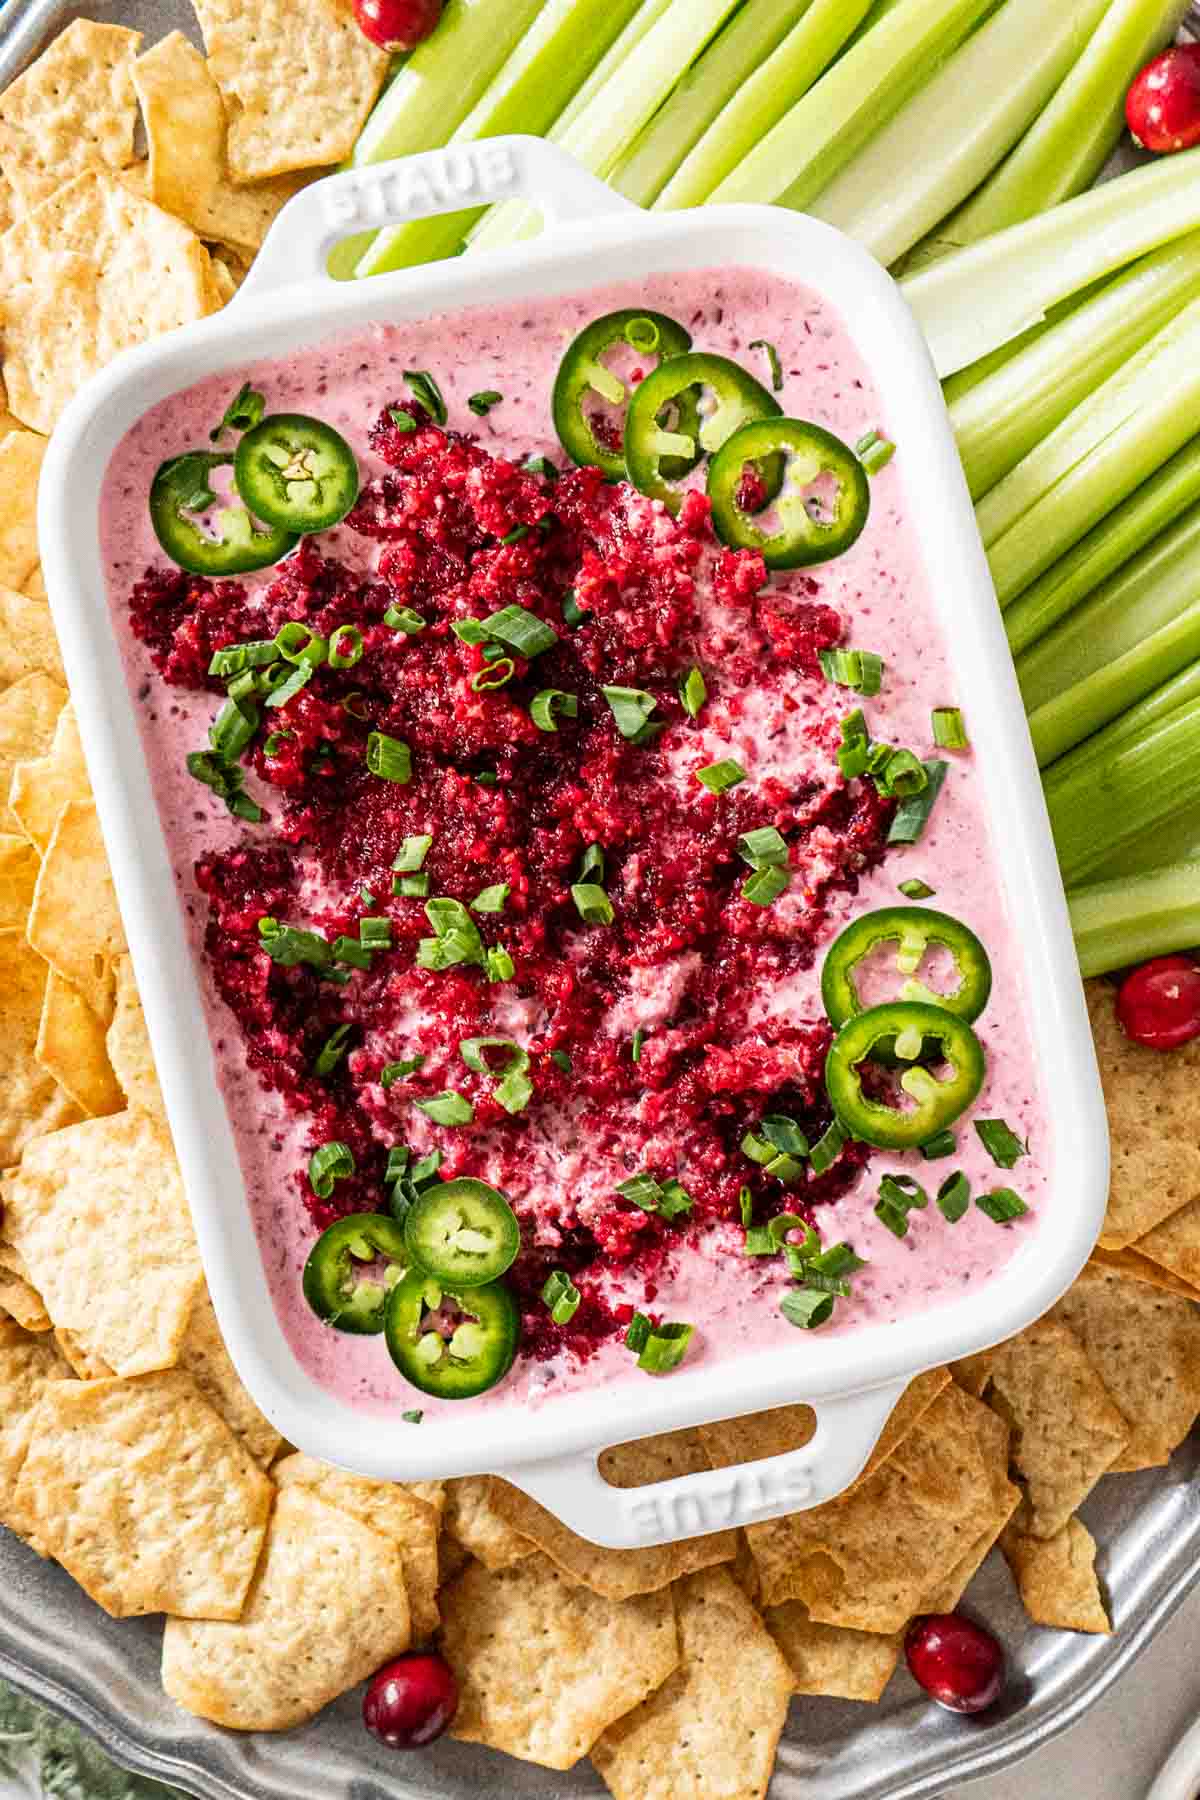 Cranberry cream cheese dip with jalapenos in a serving dish with crackers and celery.